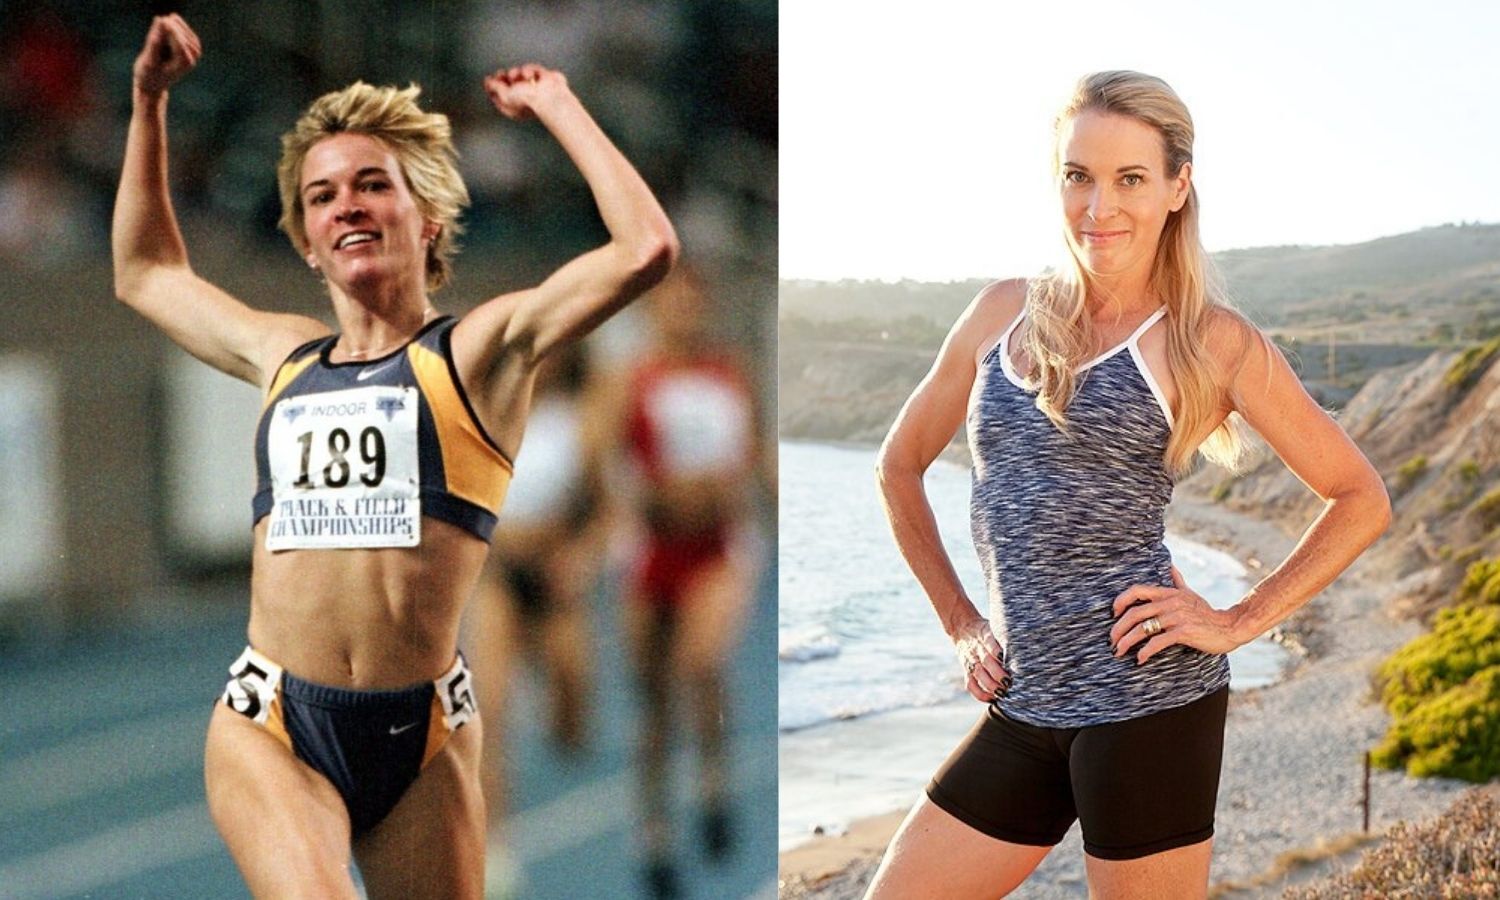 Suzy Hamilton — The story of an Olympics runner who resorted to prostitution photo